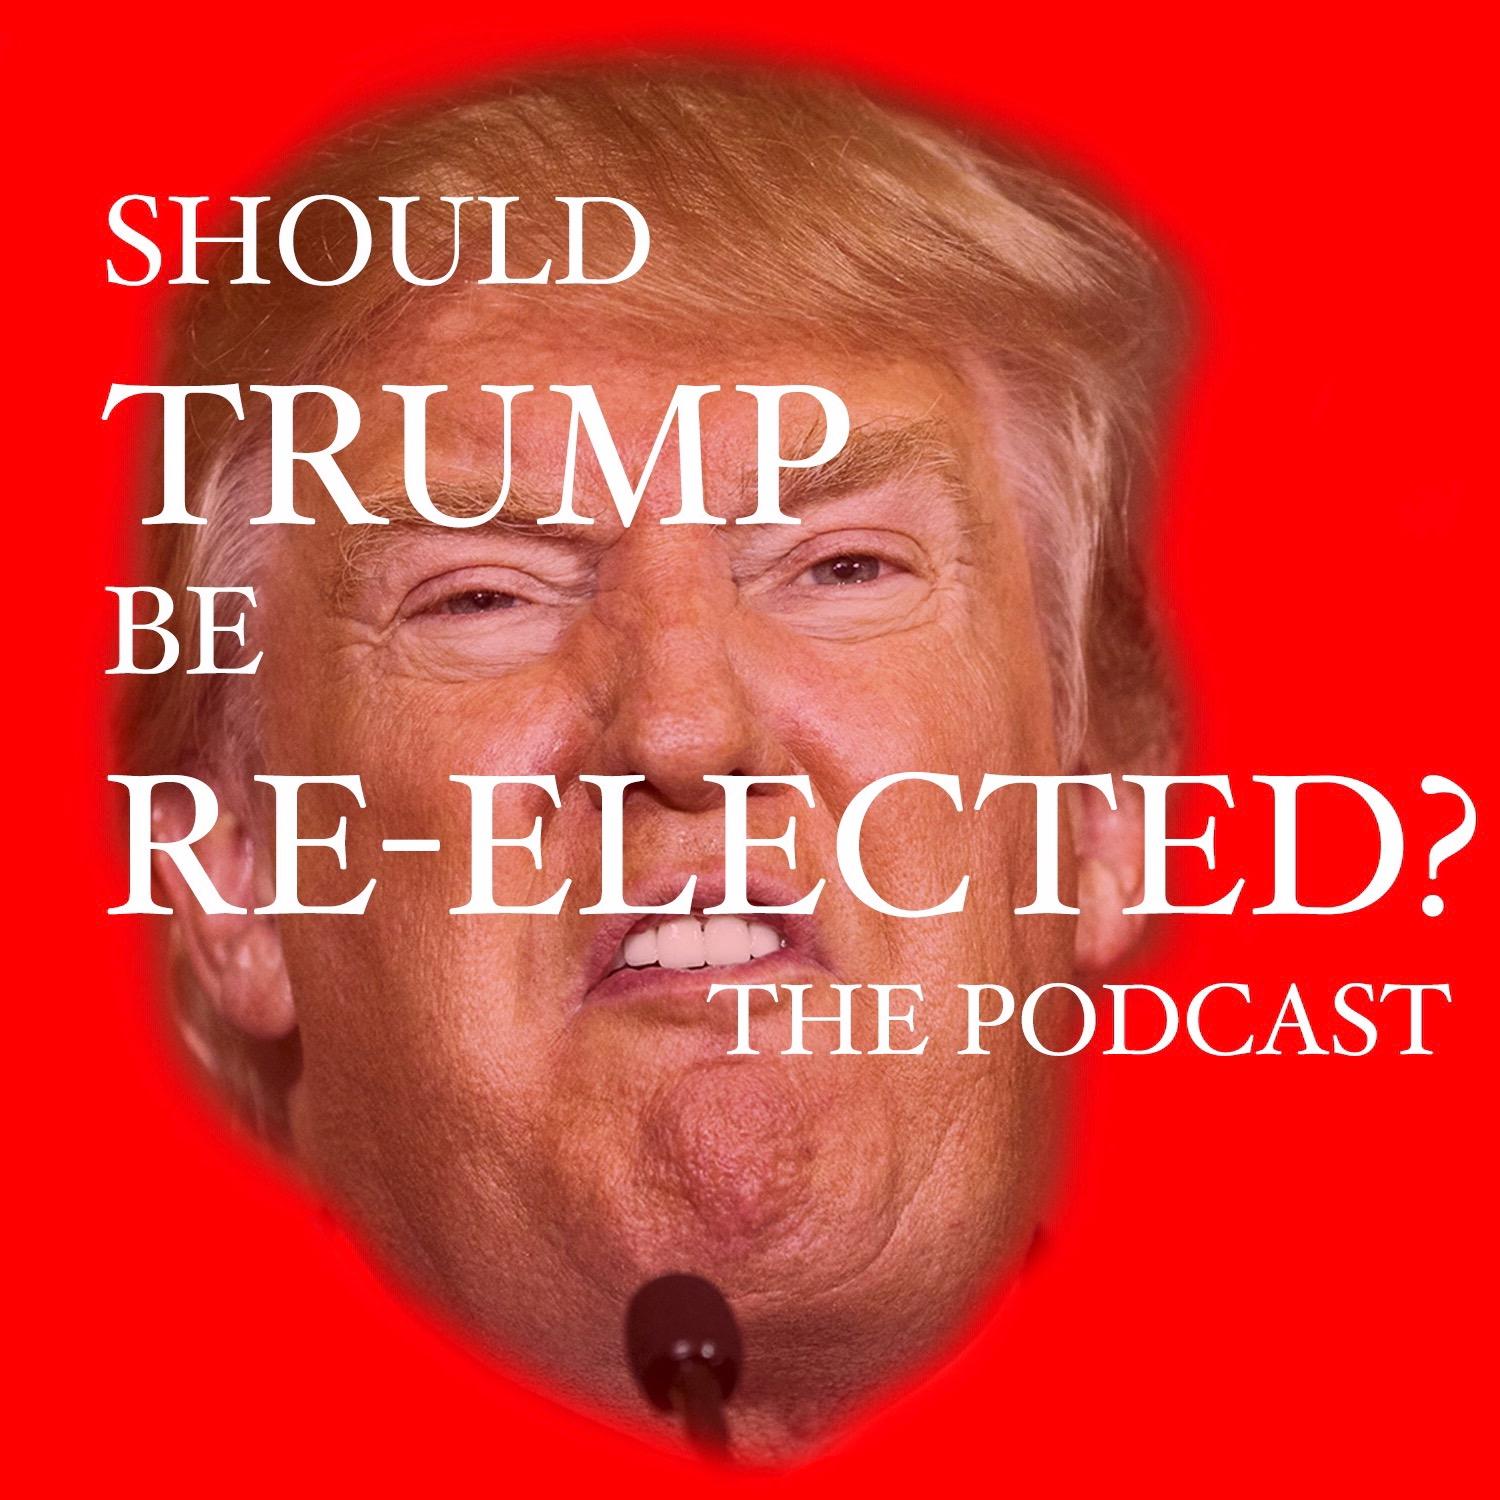 Should Trump Be Re-Elected? The Podcast